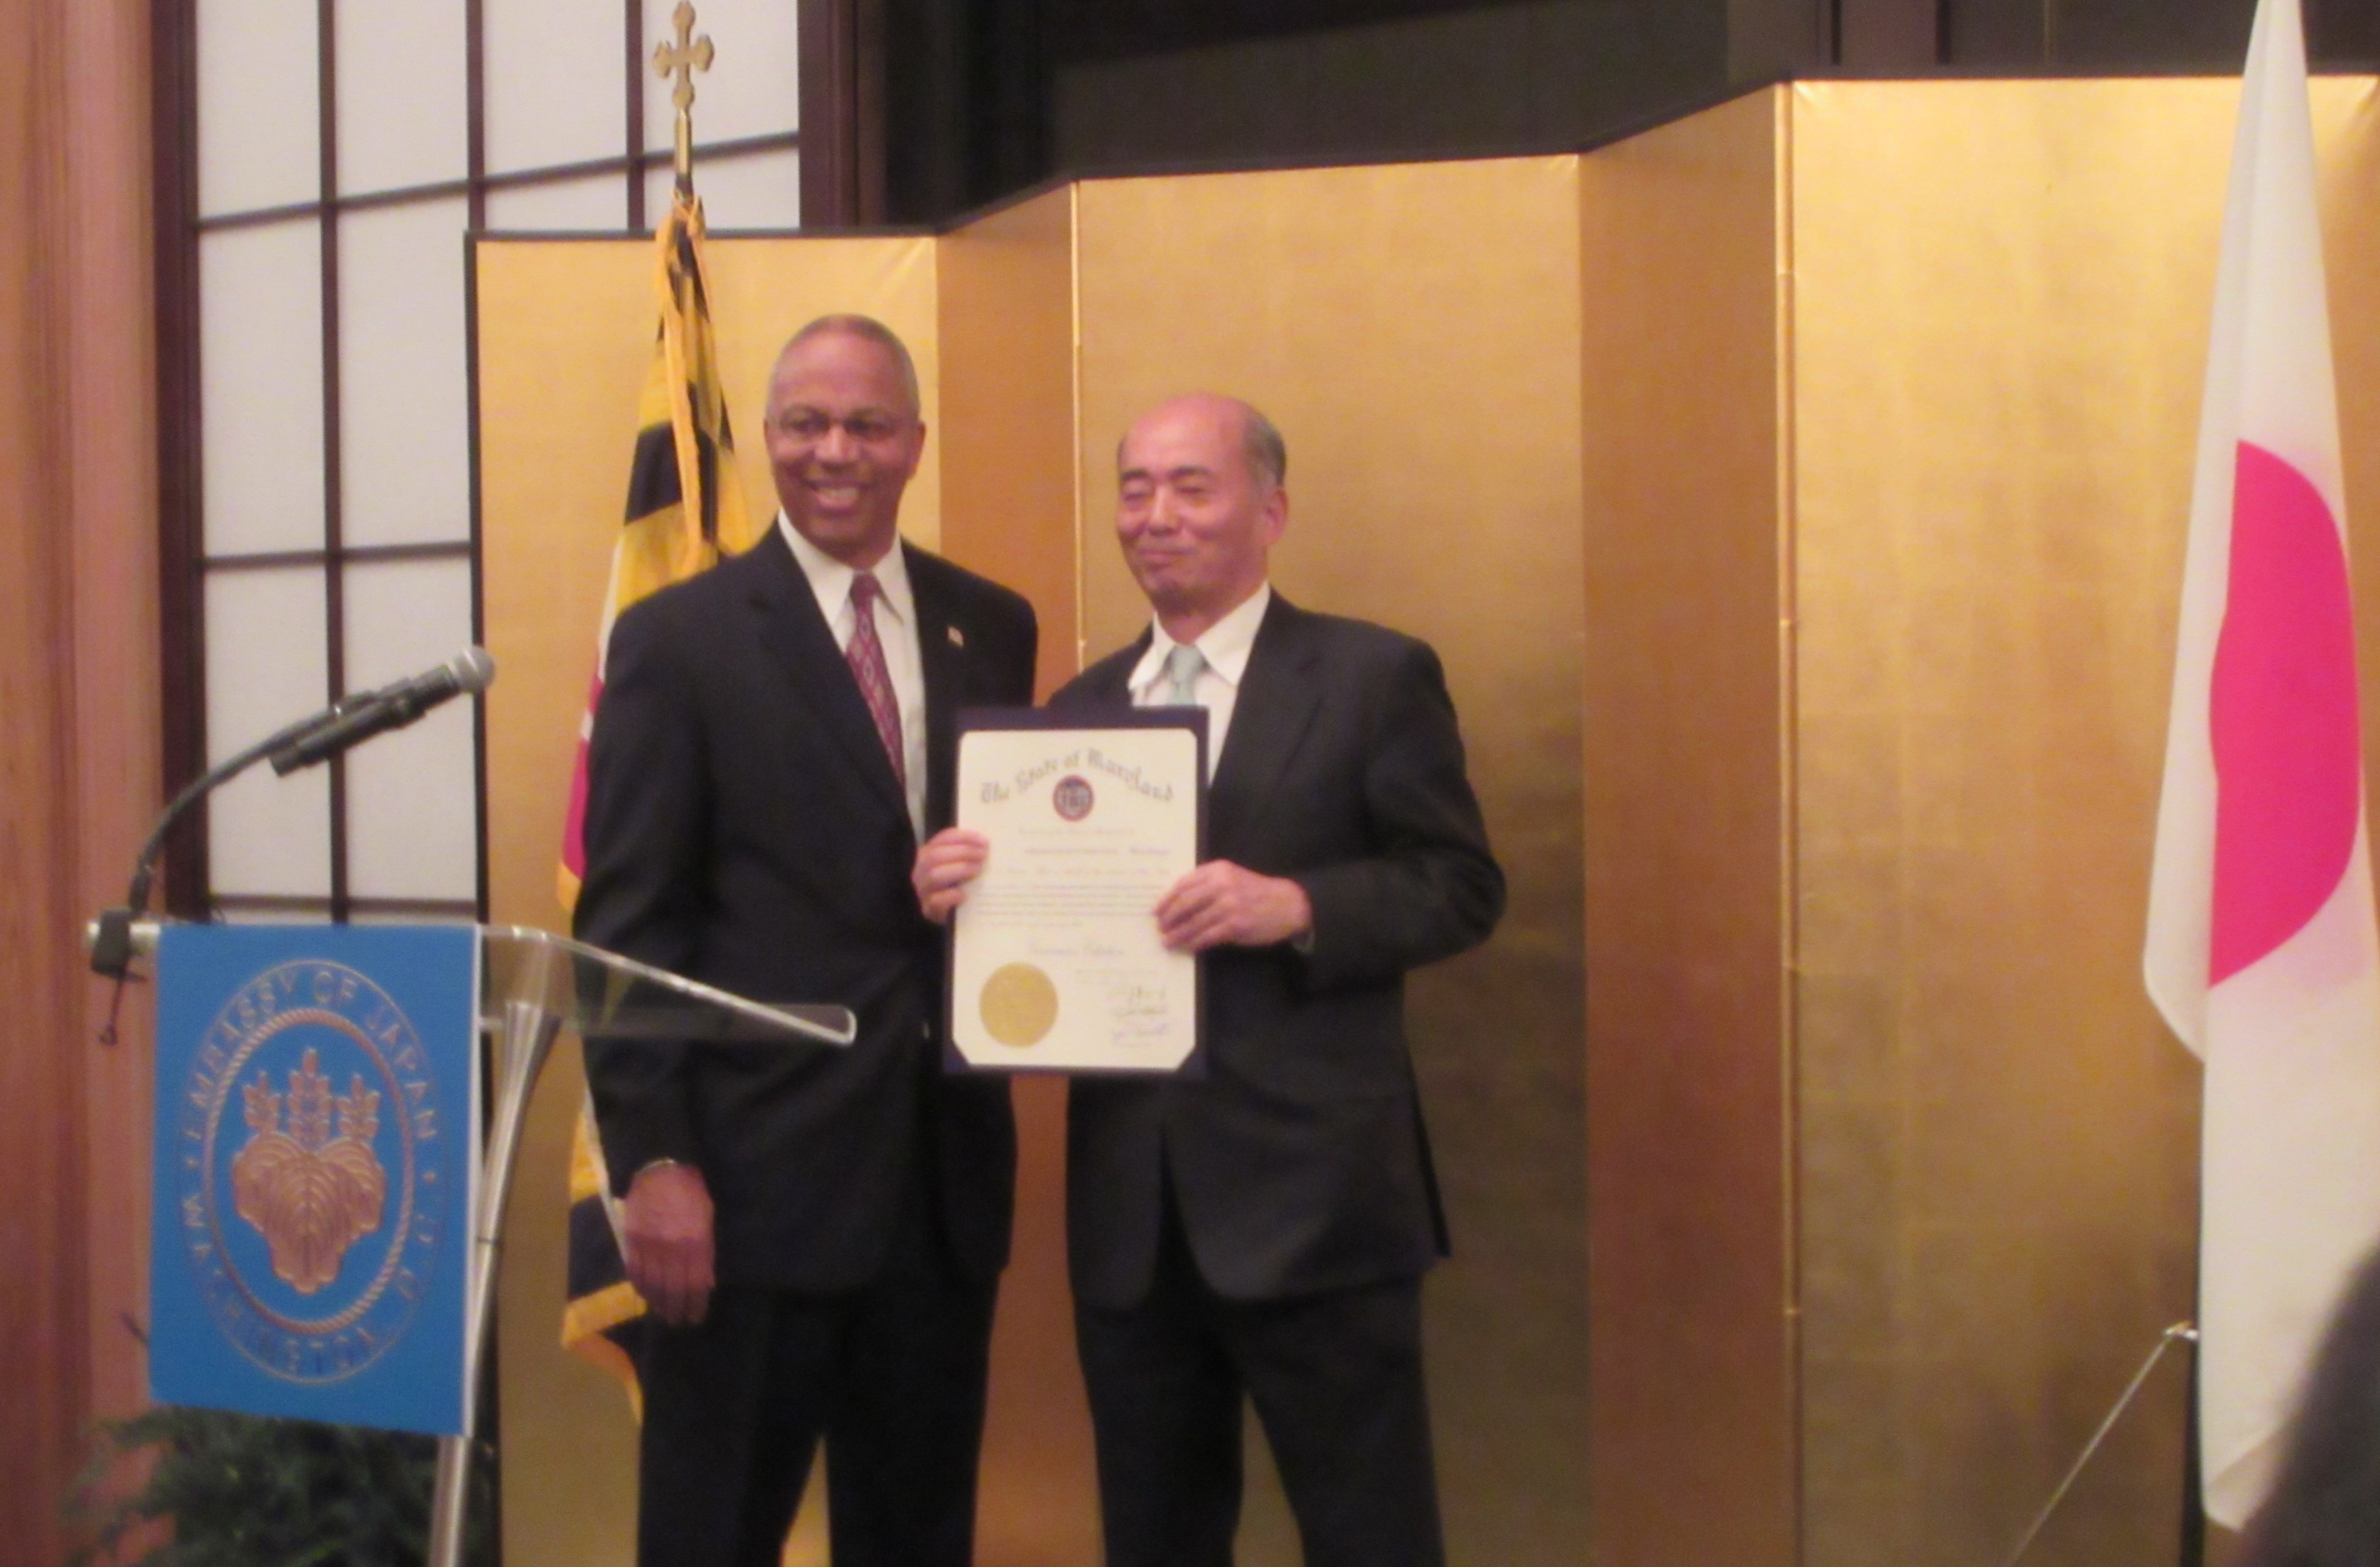 Japan recognizes new ties to Maryland — and drivers licenses too